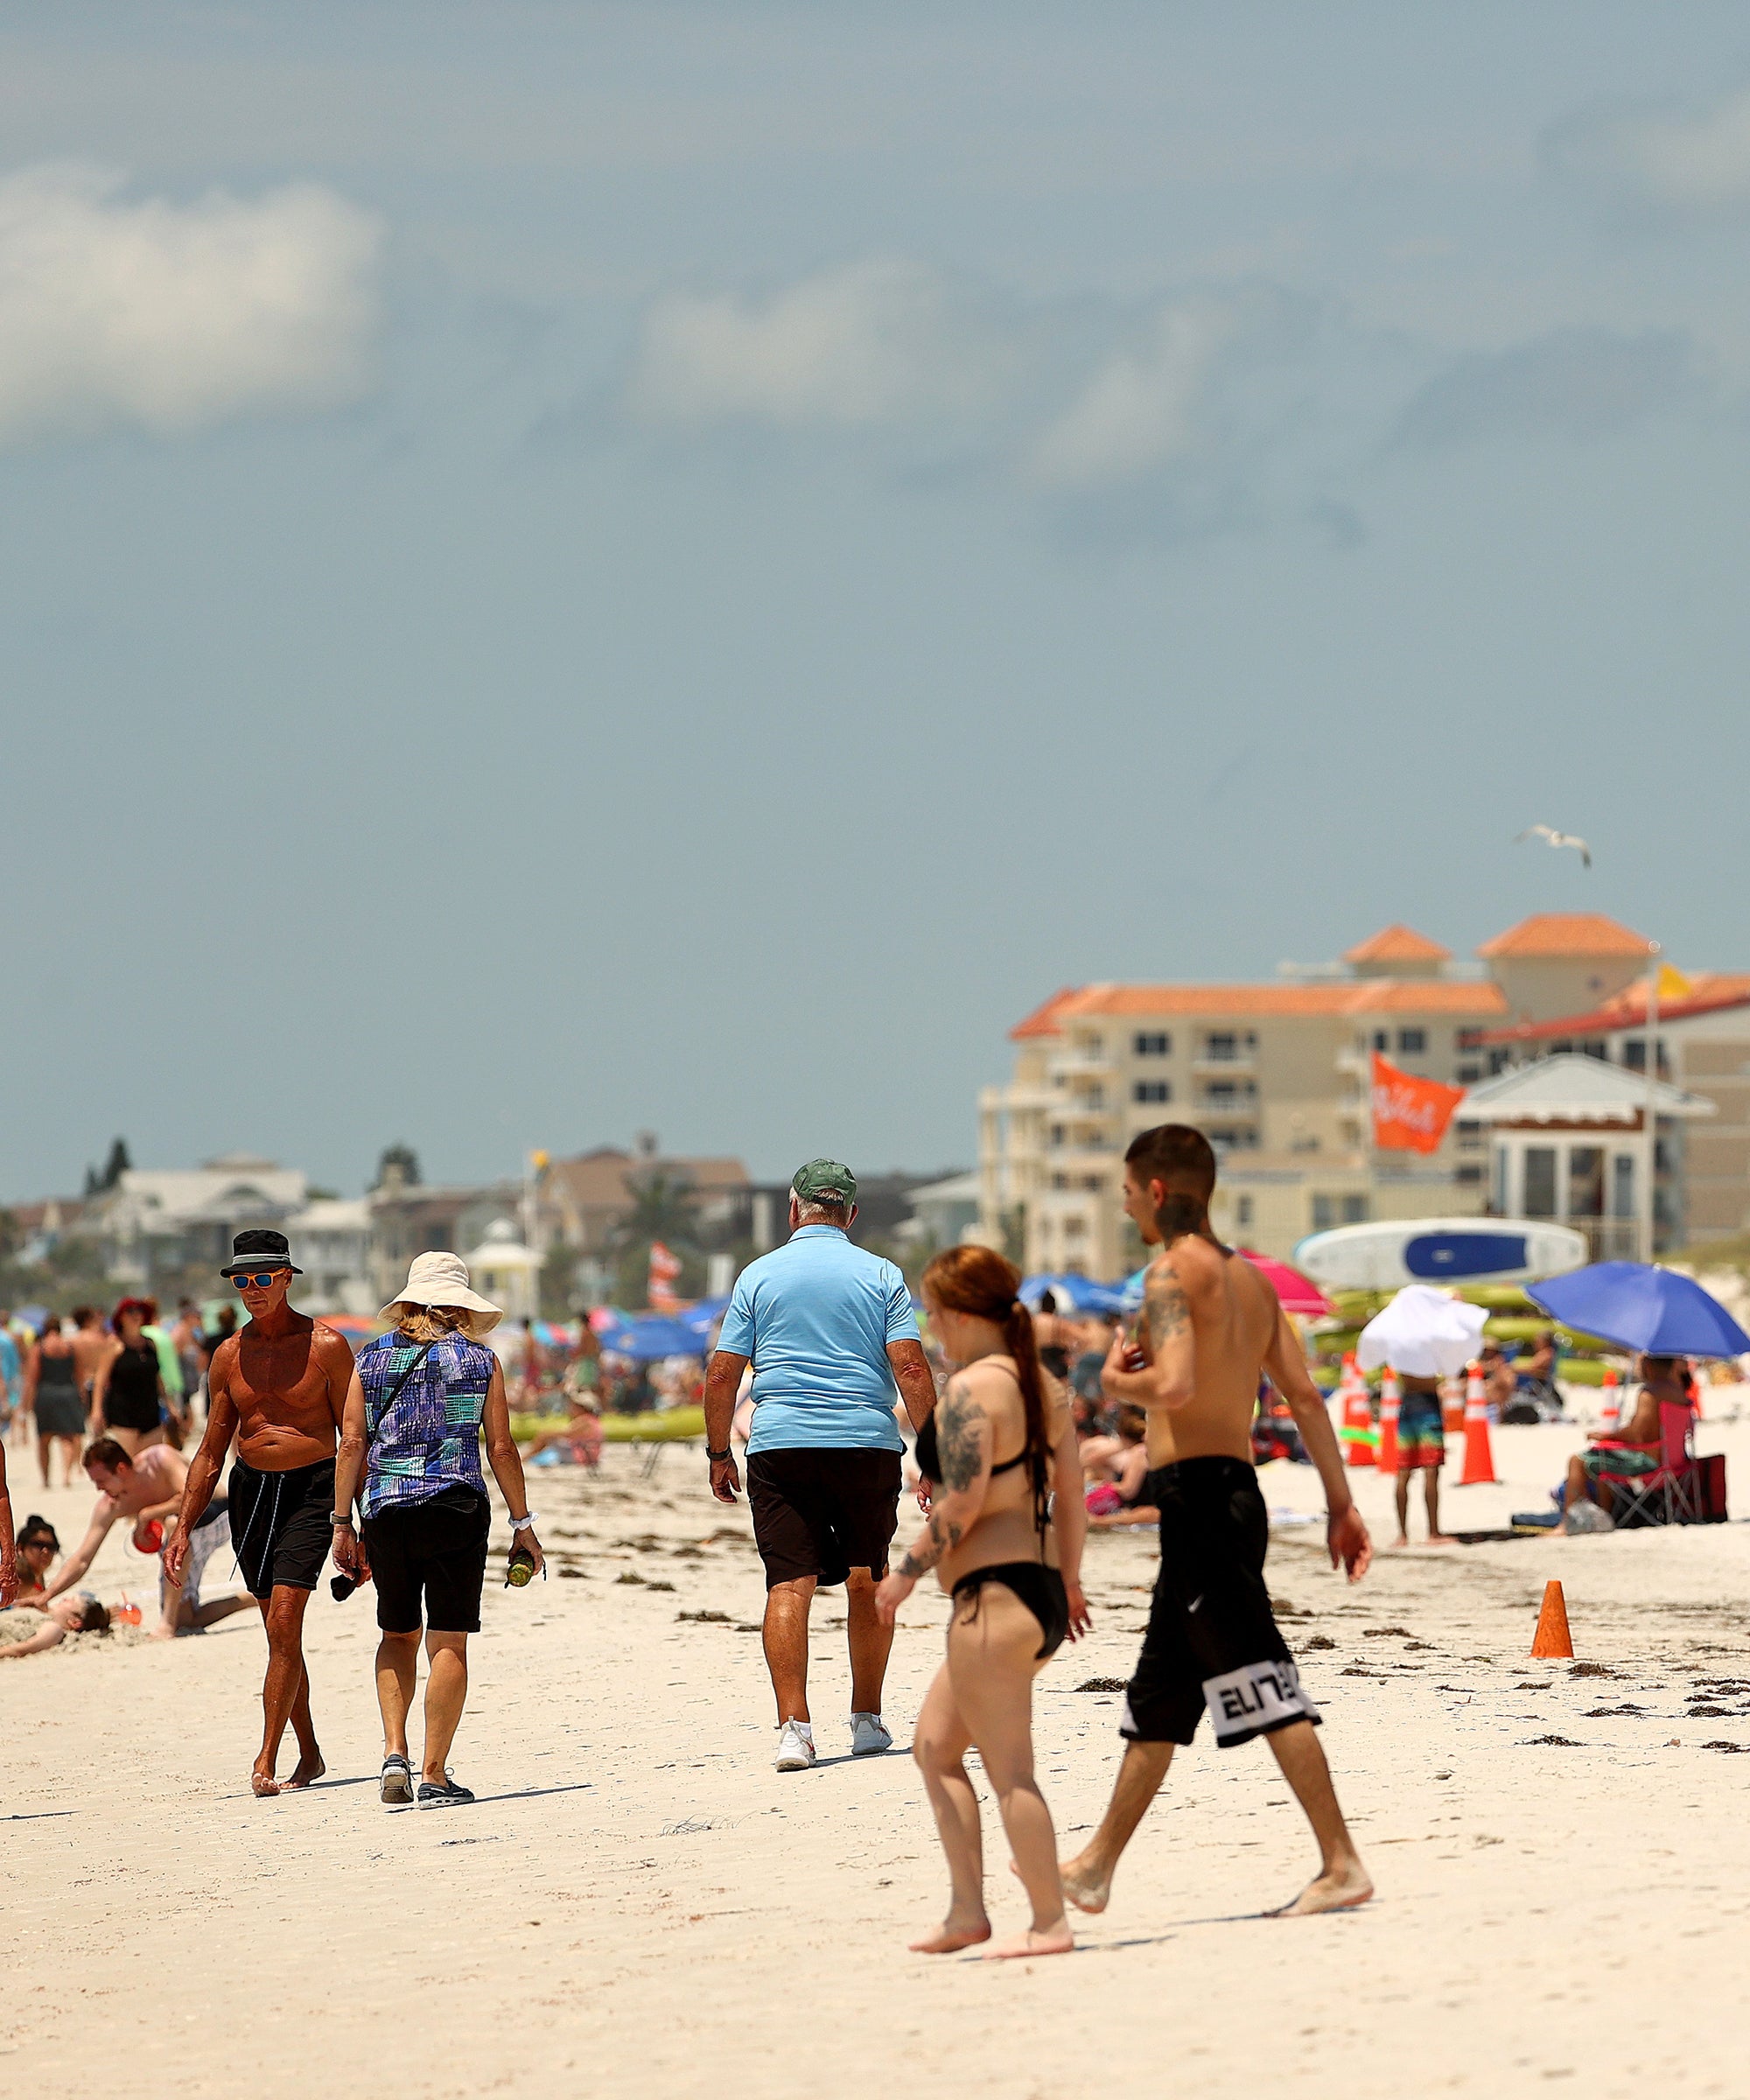 Is It Safe To Go To Beach Right Now During Coronavirus? image image